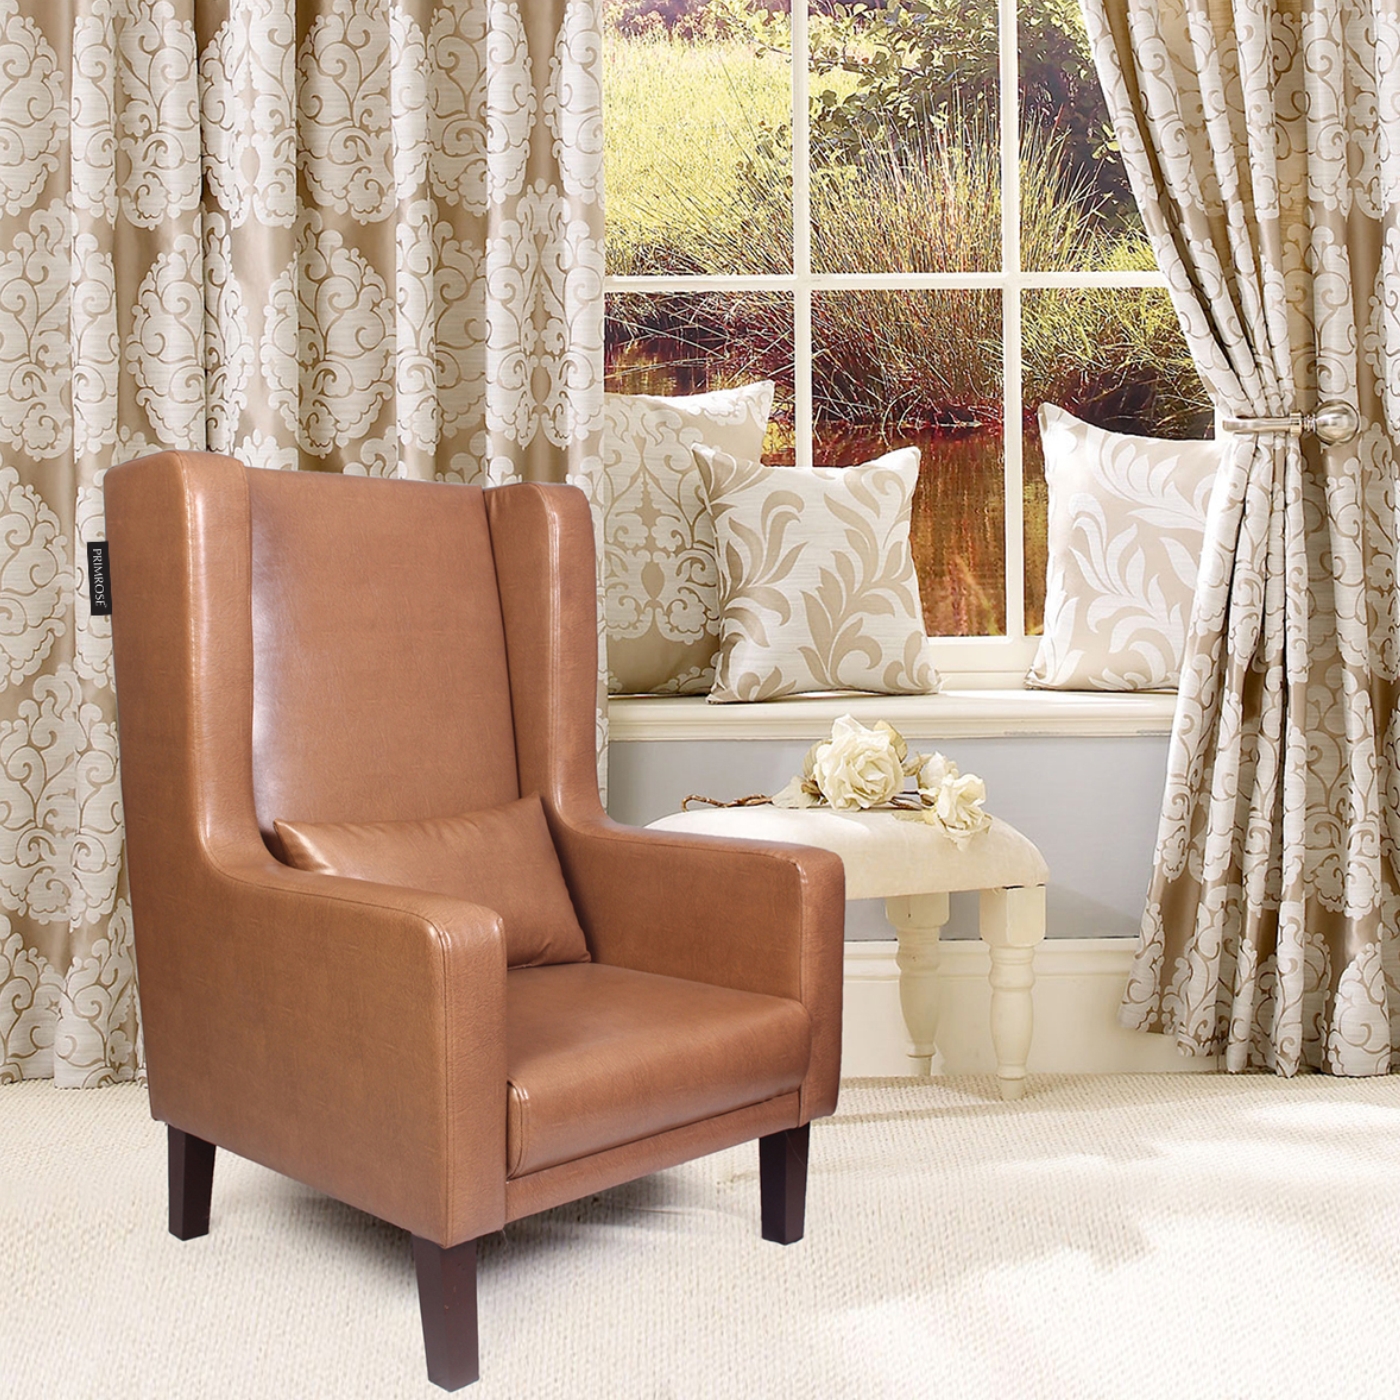 PRIMROSE Chicago High Back Synthetic Leather Fabric Chair - Light Brown  